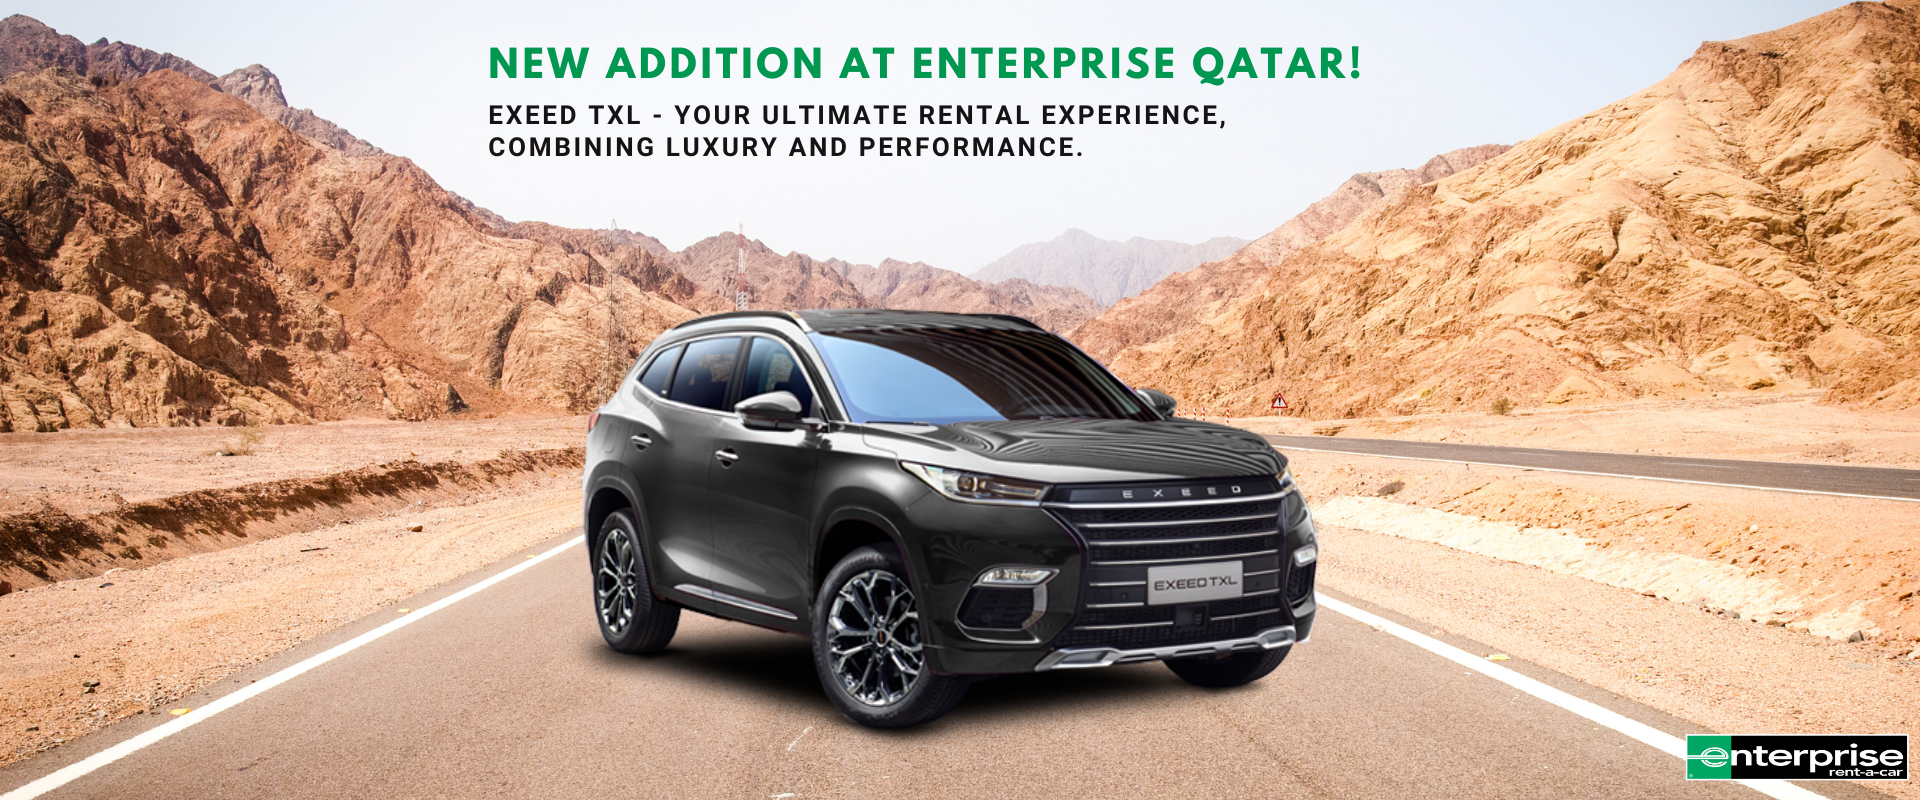 New Addition at Enterprise Qatar: Exeed TXL - Your Ultimate Rental Experience, combining luxury and performance.